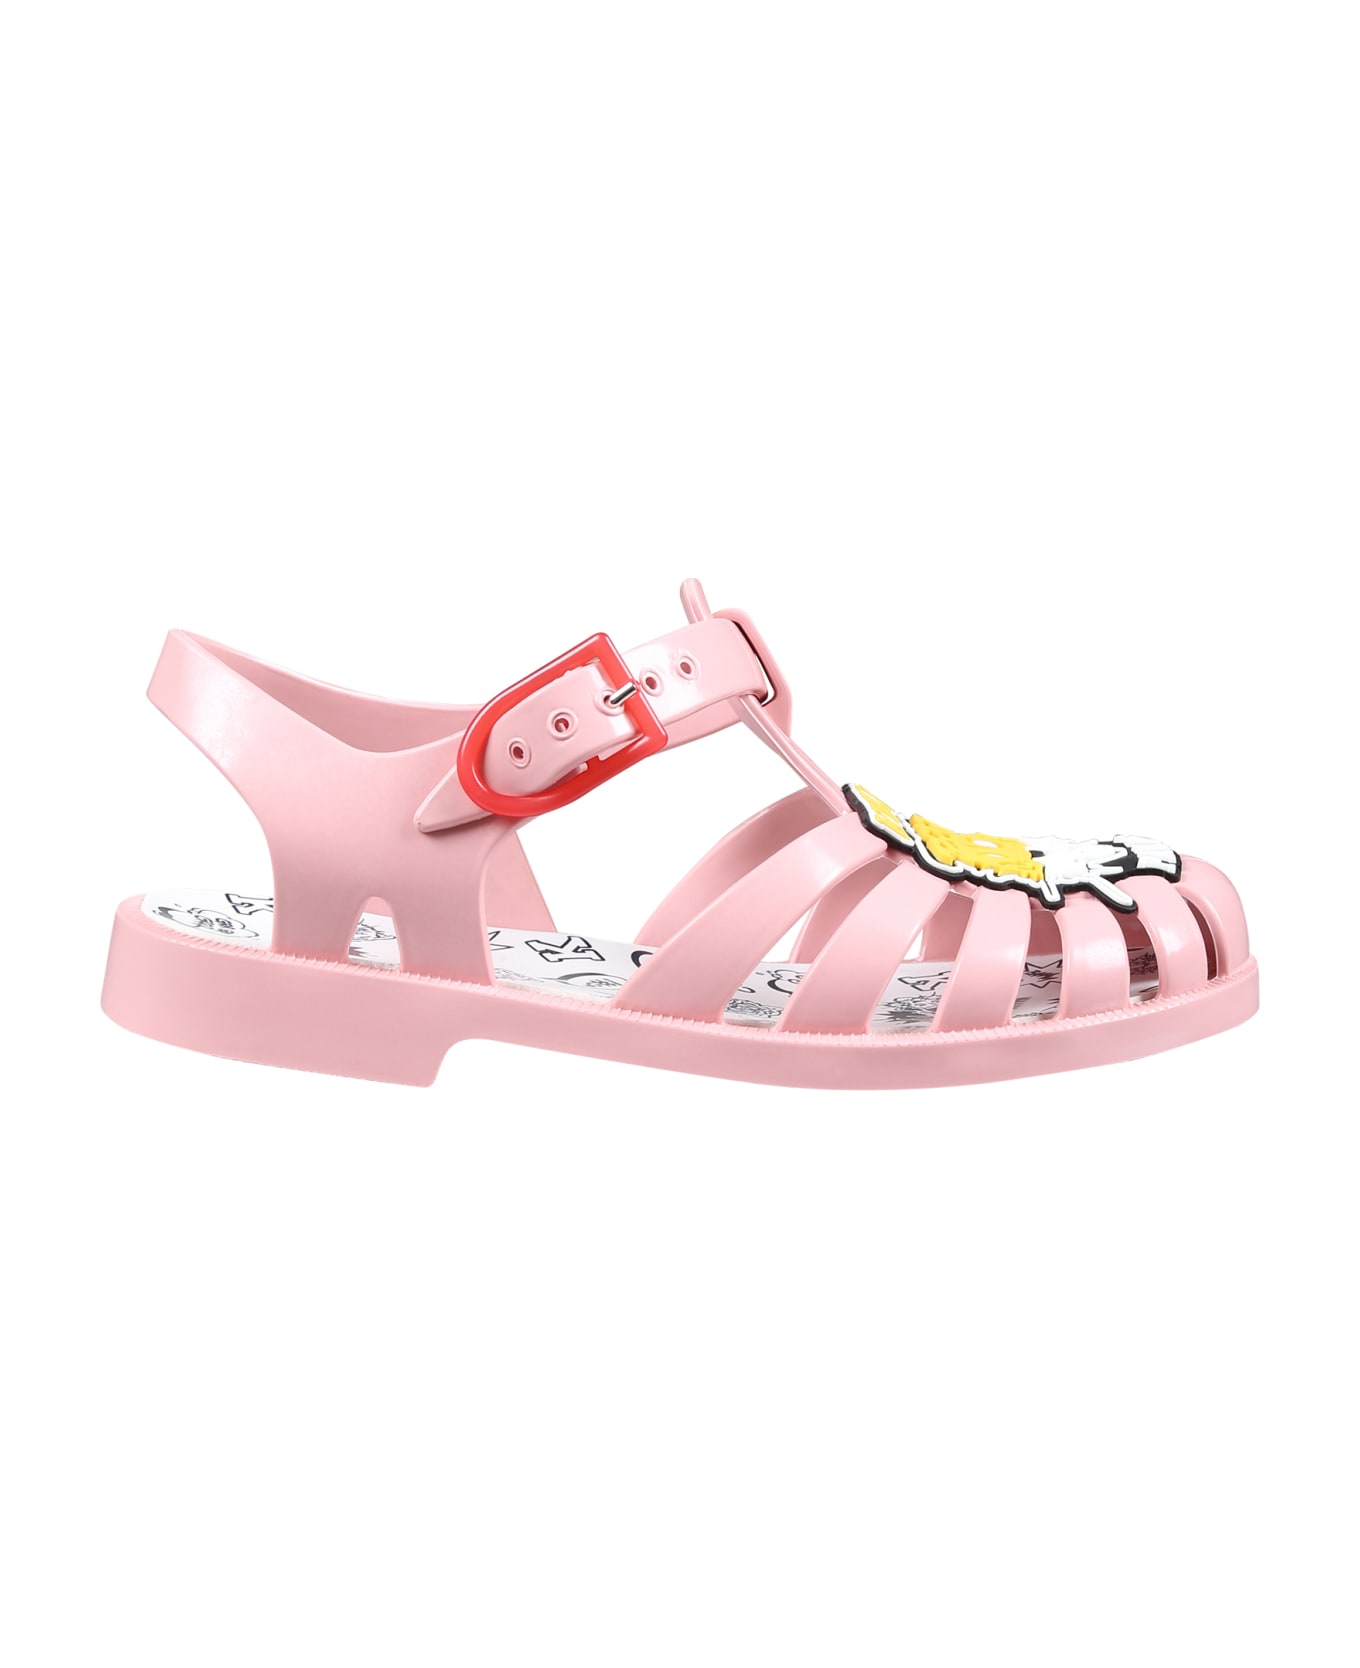 Kenzo Kids Pink Sandals For Girl With Tiger - Rosa シューズ